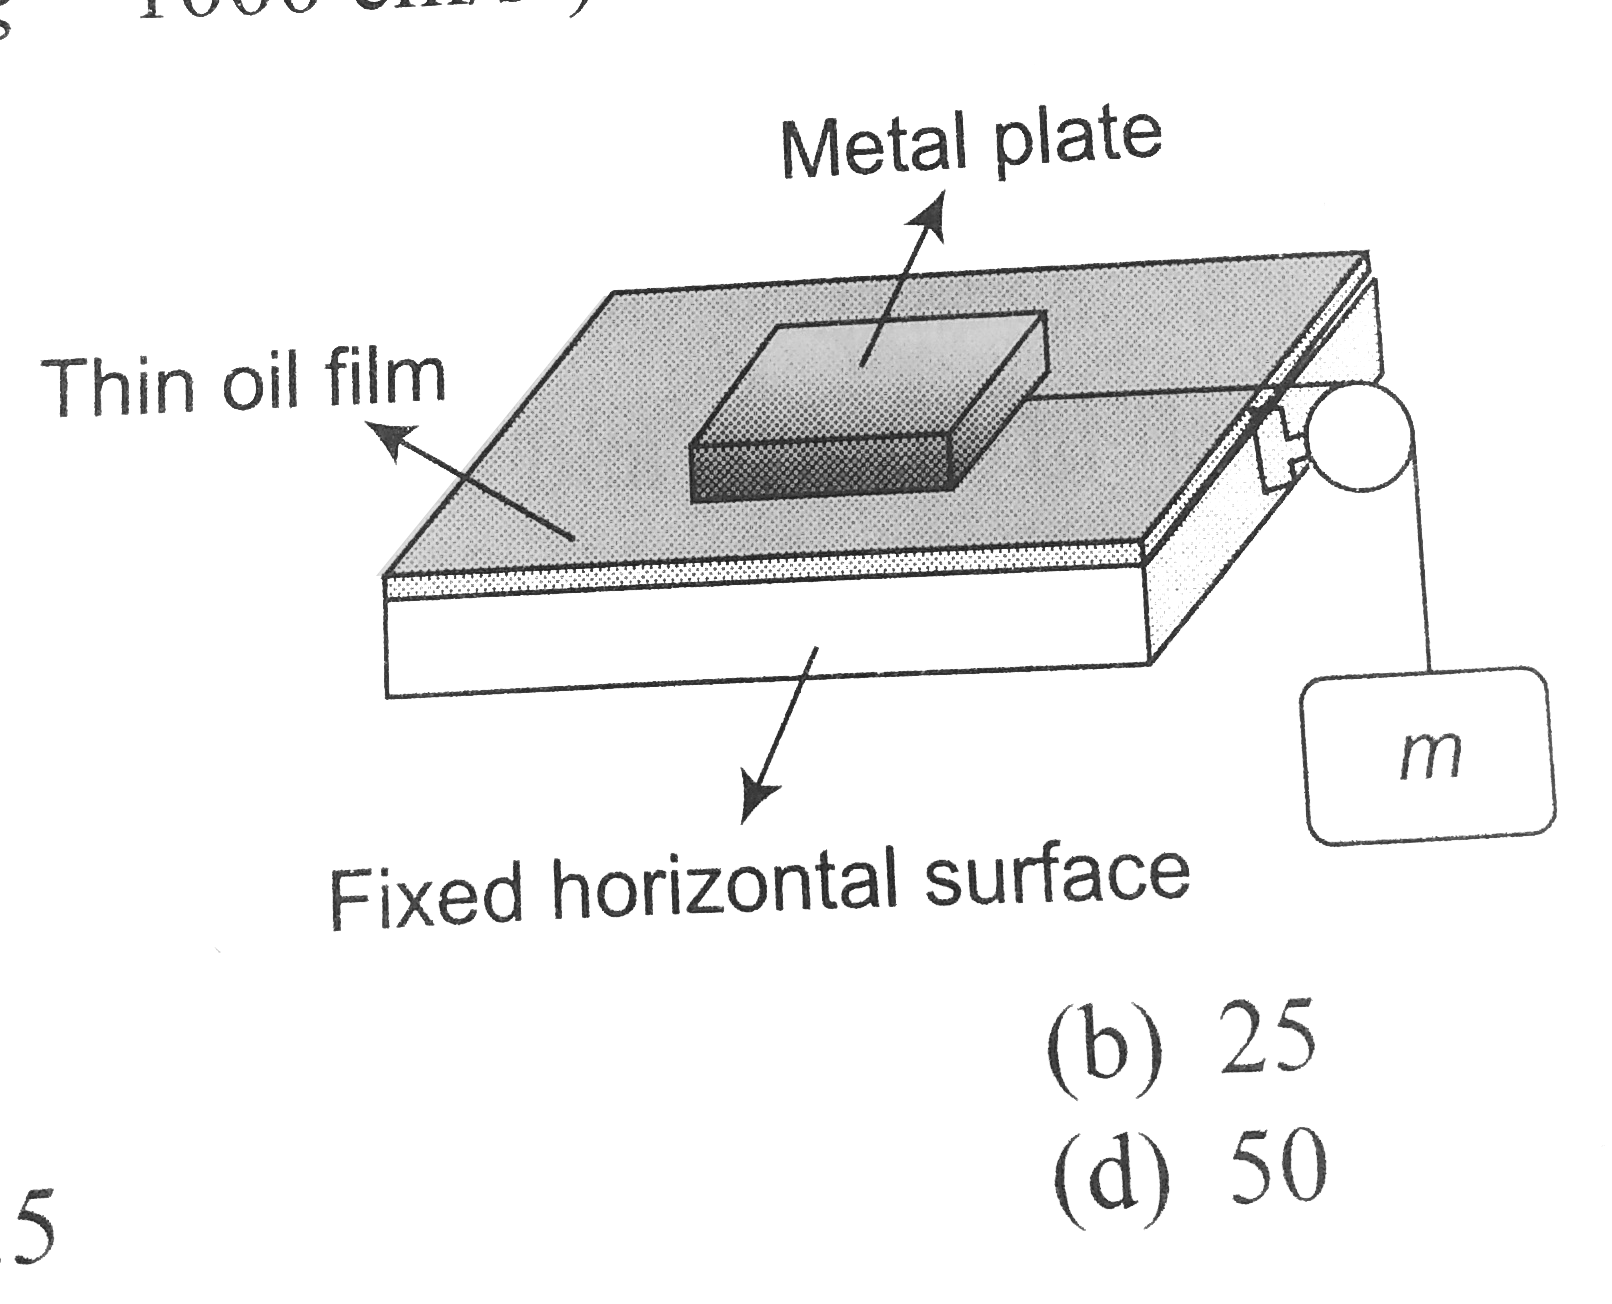 A rectangular metal plate has dimensions of 10cmxx20cm. A thin film of oil separates the plate from a fixed horizontal surface. The separation between the rectangular plate and the horizontal surface is 0.2mm. An ideal string is attached to the plate and passes over an ideal pulley to a mass m. When m=125gm, the metal plate moves at constant speed of 5(cm)/(s), across the horizontal surface. Then the coefficient of viscosity of oil in (